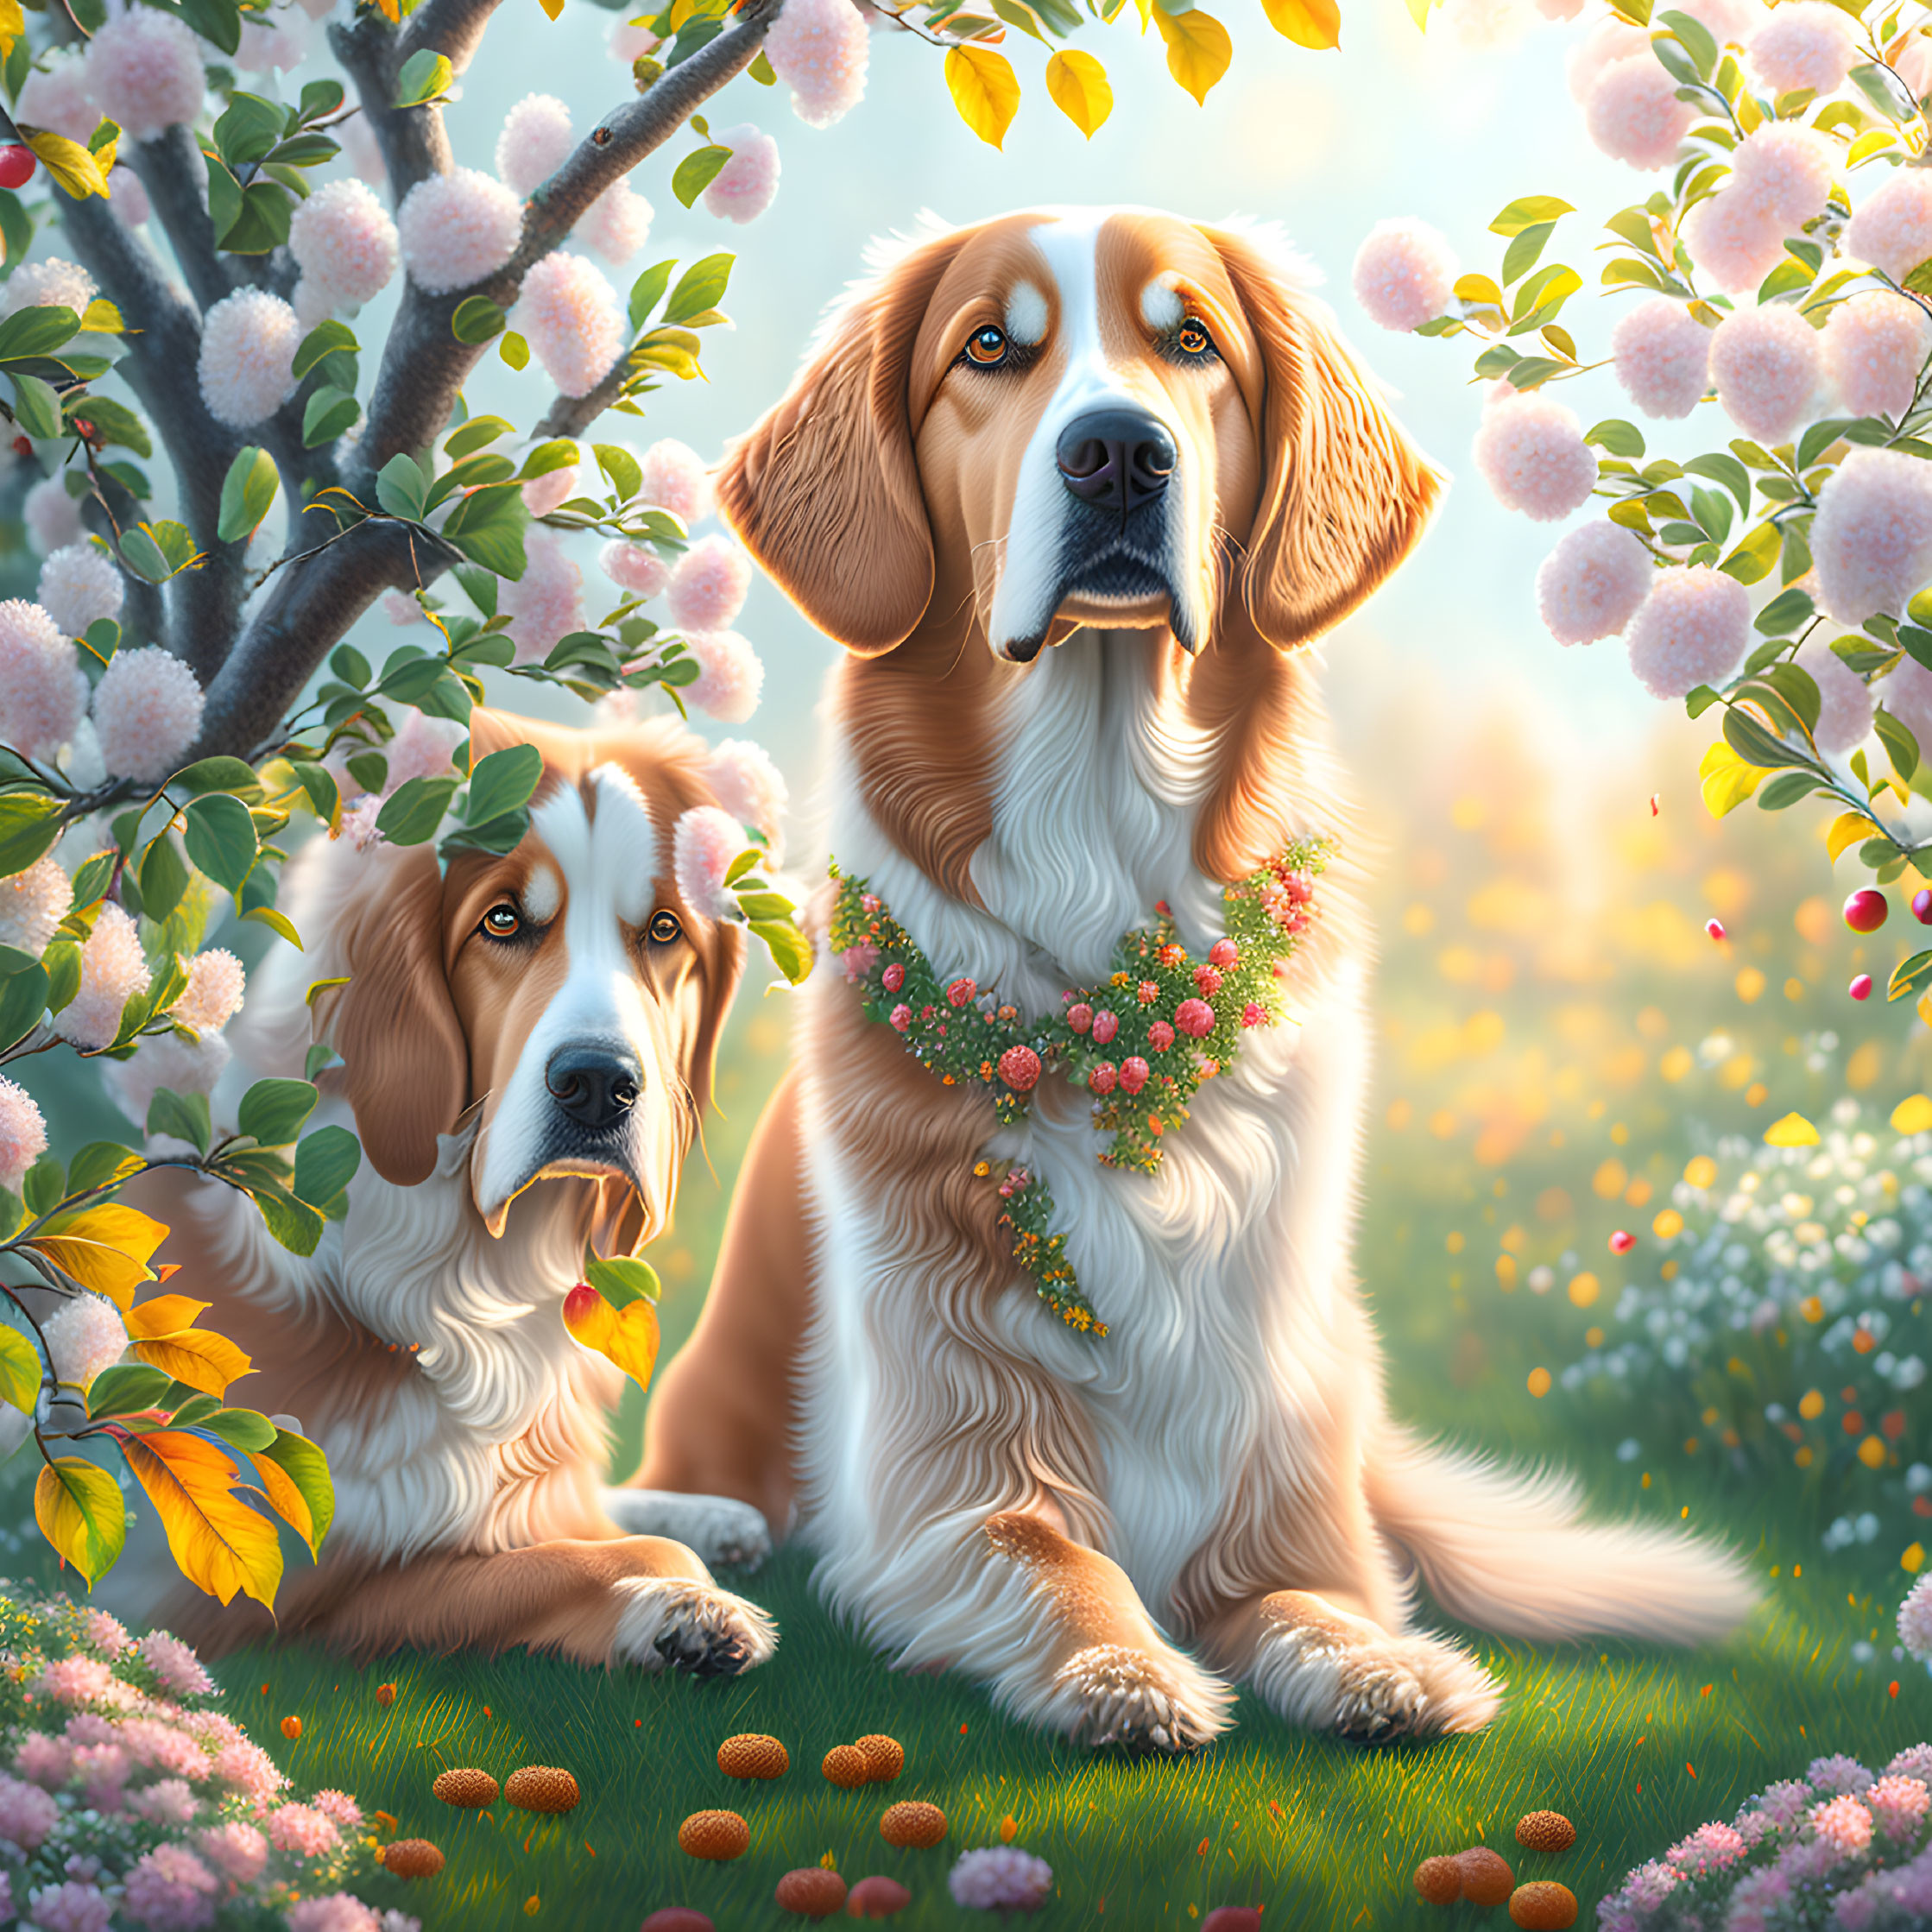 Two dogs in a blooming garden with floral necklace and ripe fruits.